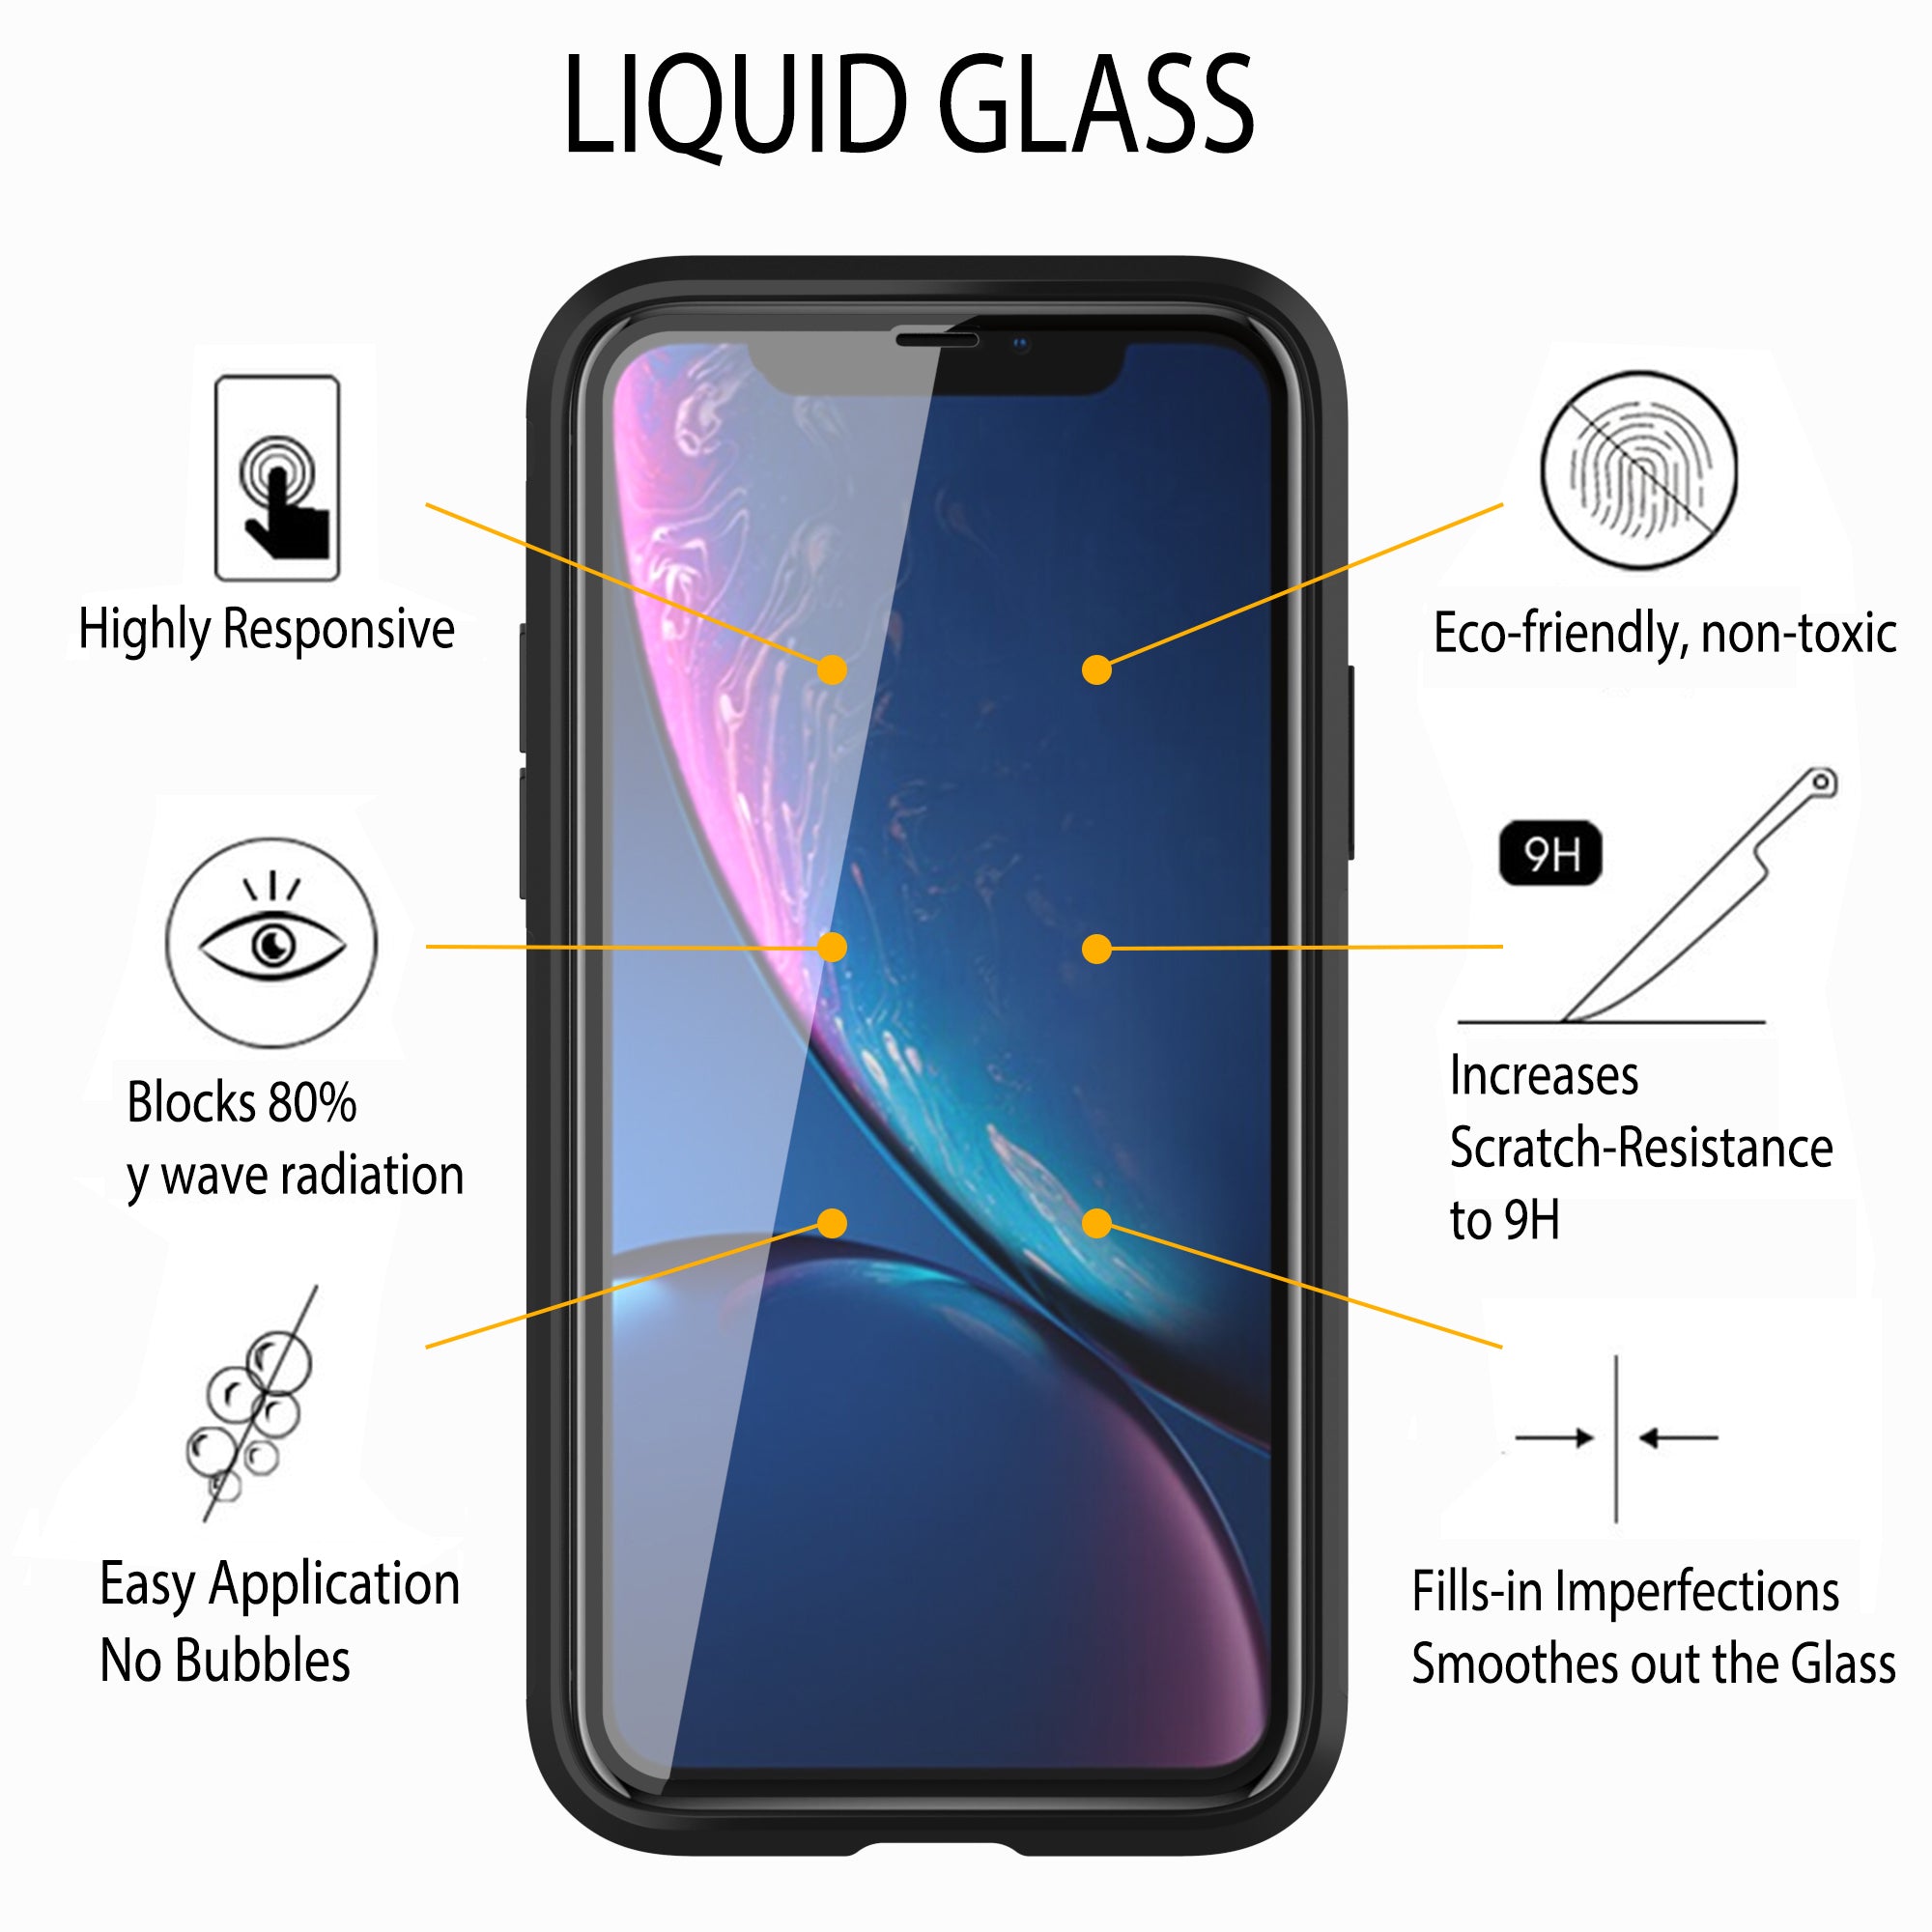 Luvvitt Clear View Case and Liquid Glass Screen Protector Bundle for iPhone 11 Pro Max 2019